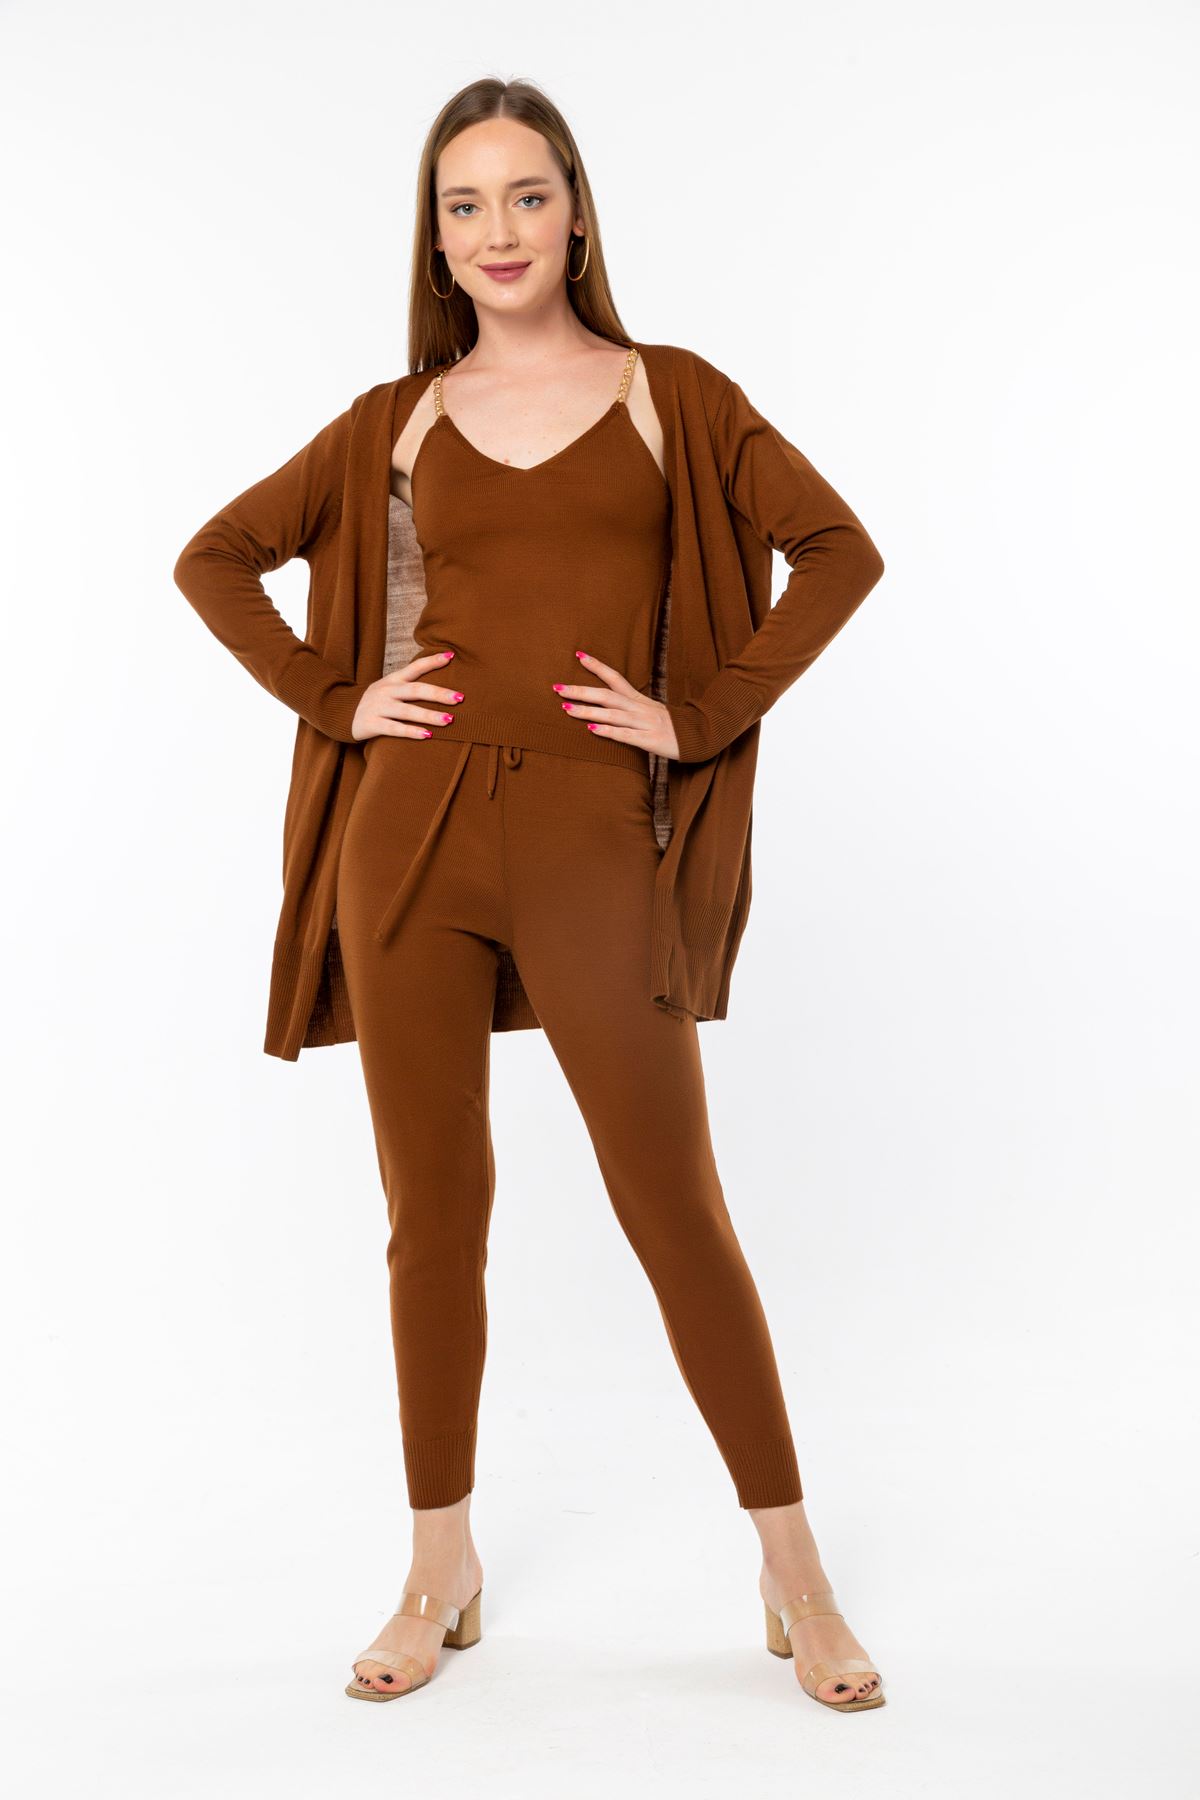 Knitwear Fabric Wide V Neck Long Full Fit Women'S Set 3 Pieces - Brown